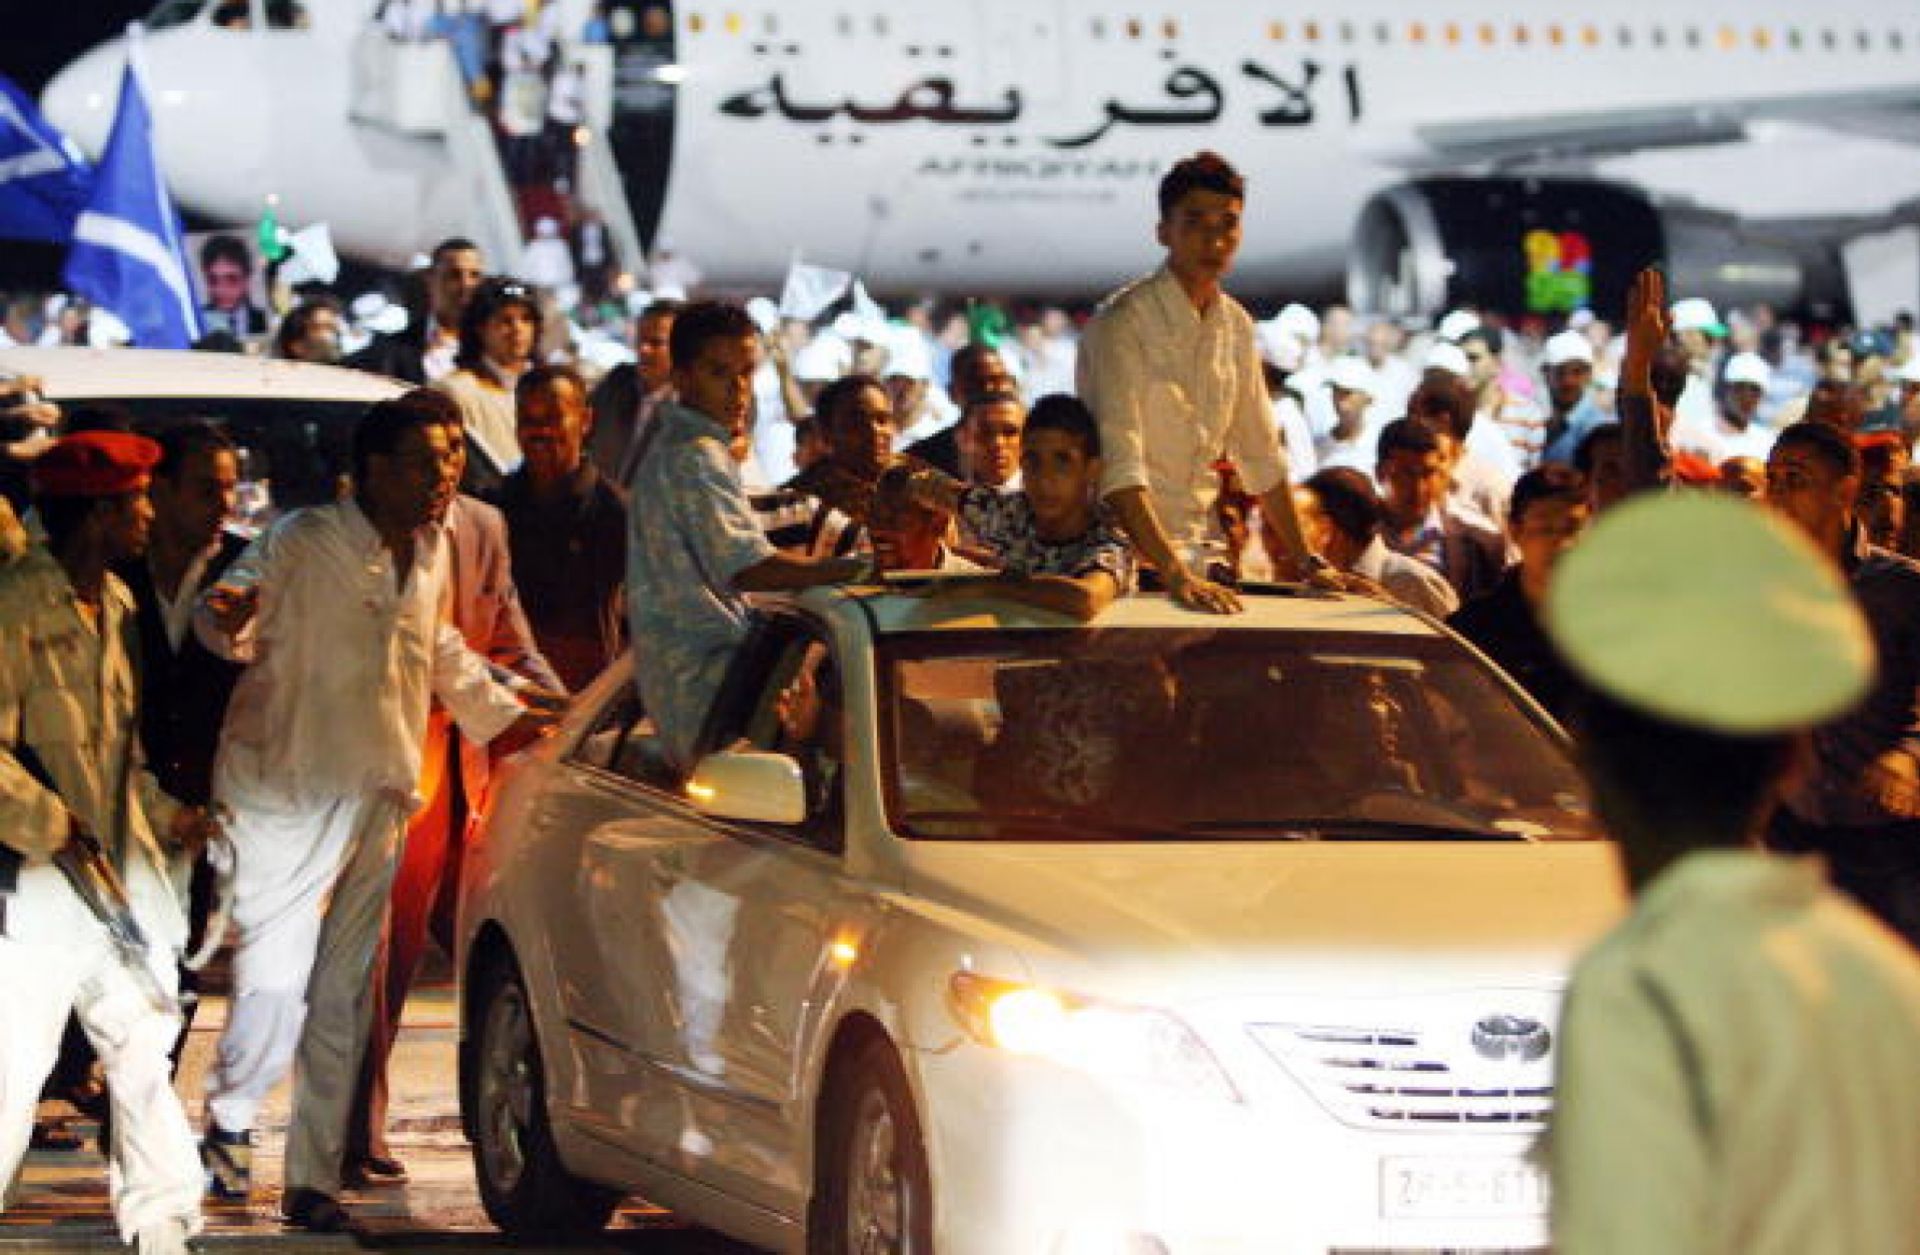 Libyans attend a welcoming ceremony for freed Lockerbie bomber Abdel Basset Ali al-Megrahi (not seen) upon his arrival in Tripoli late on August 20, 2009.